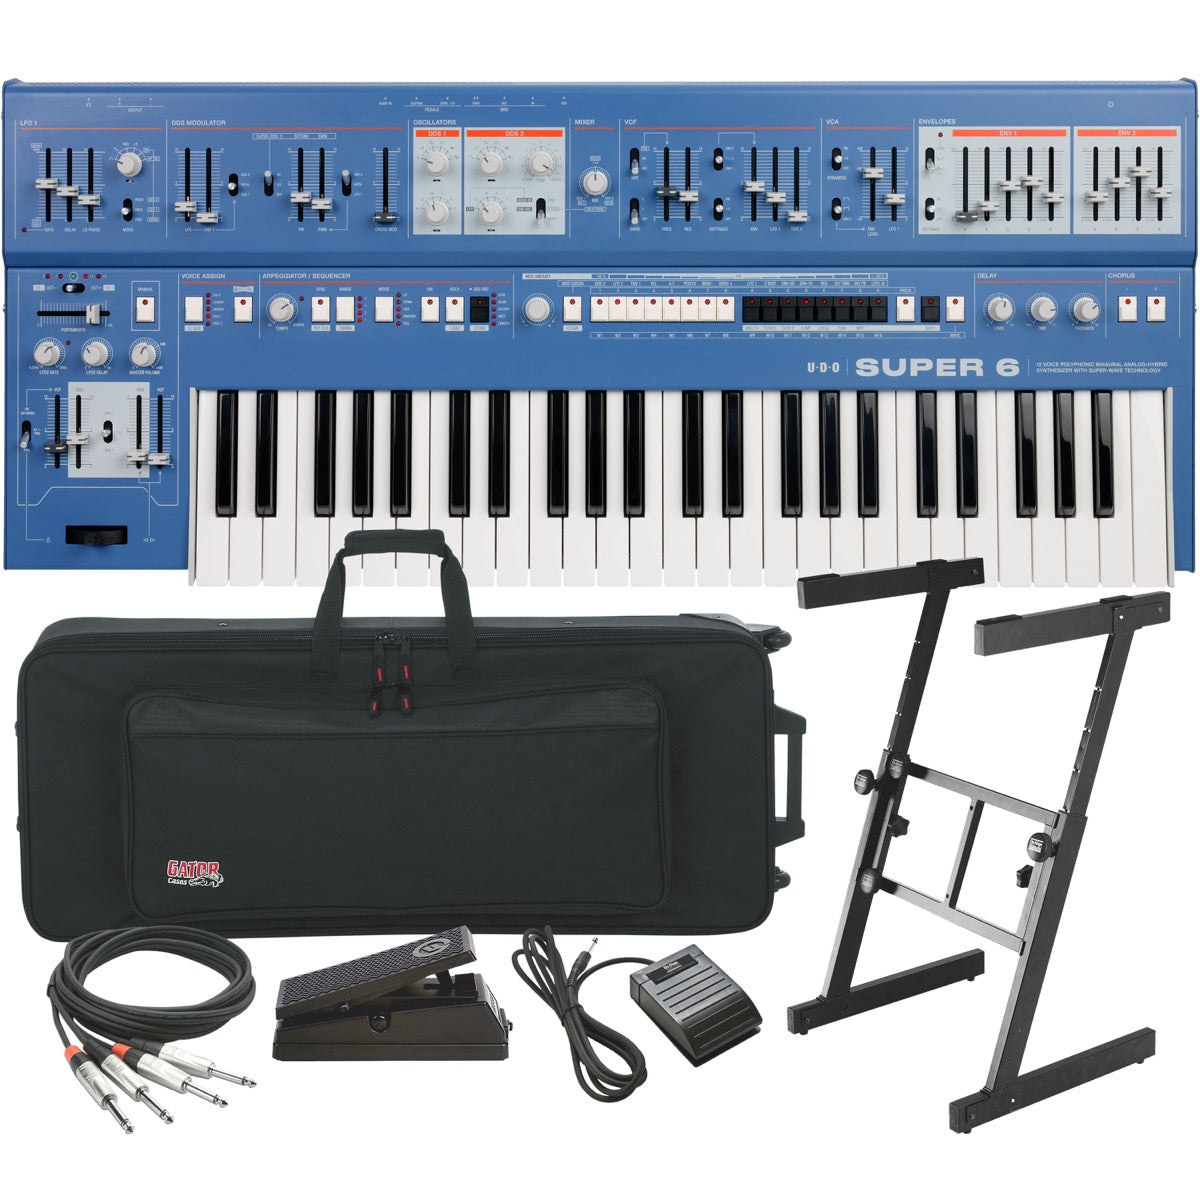 Collage showing components in UDO Audio Super 6 12-Voice Polyphonic Keyboard Synthesizer - Blue STAGE RIG